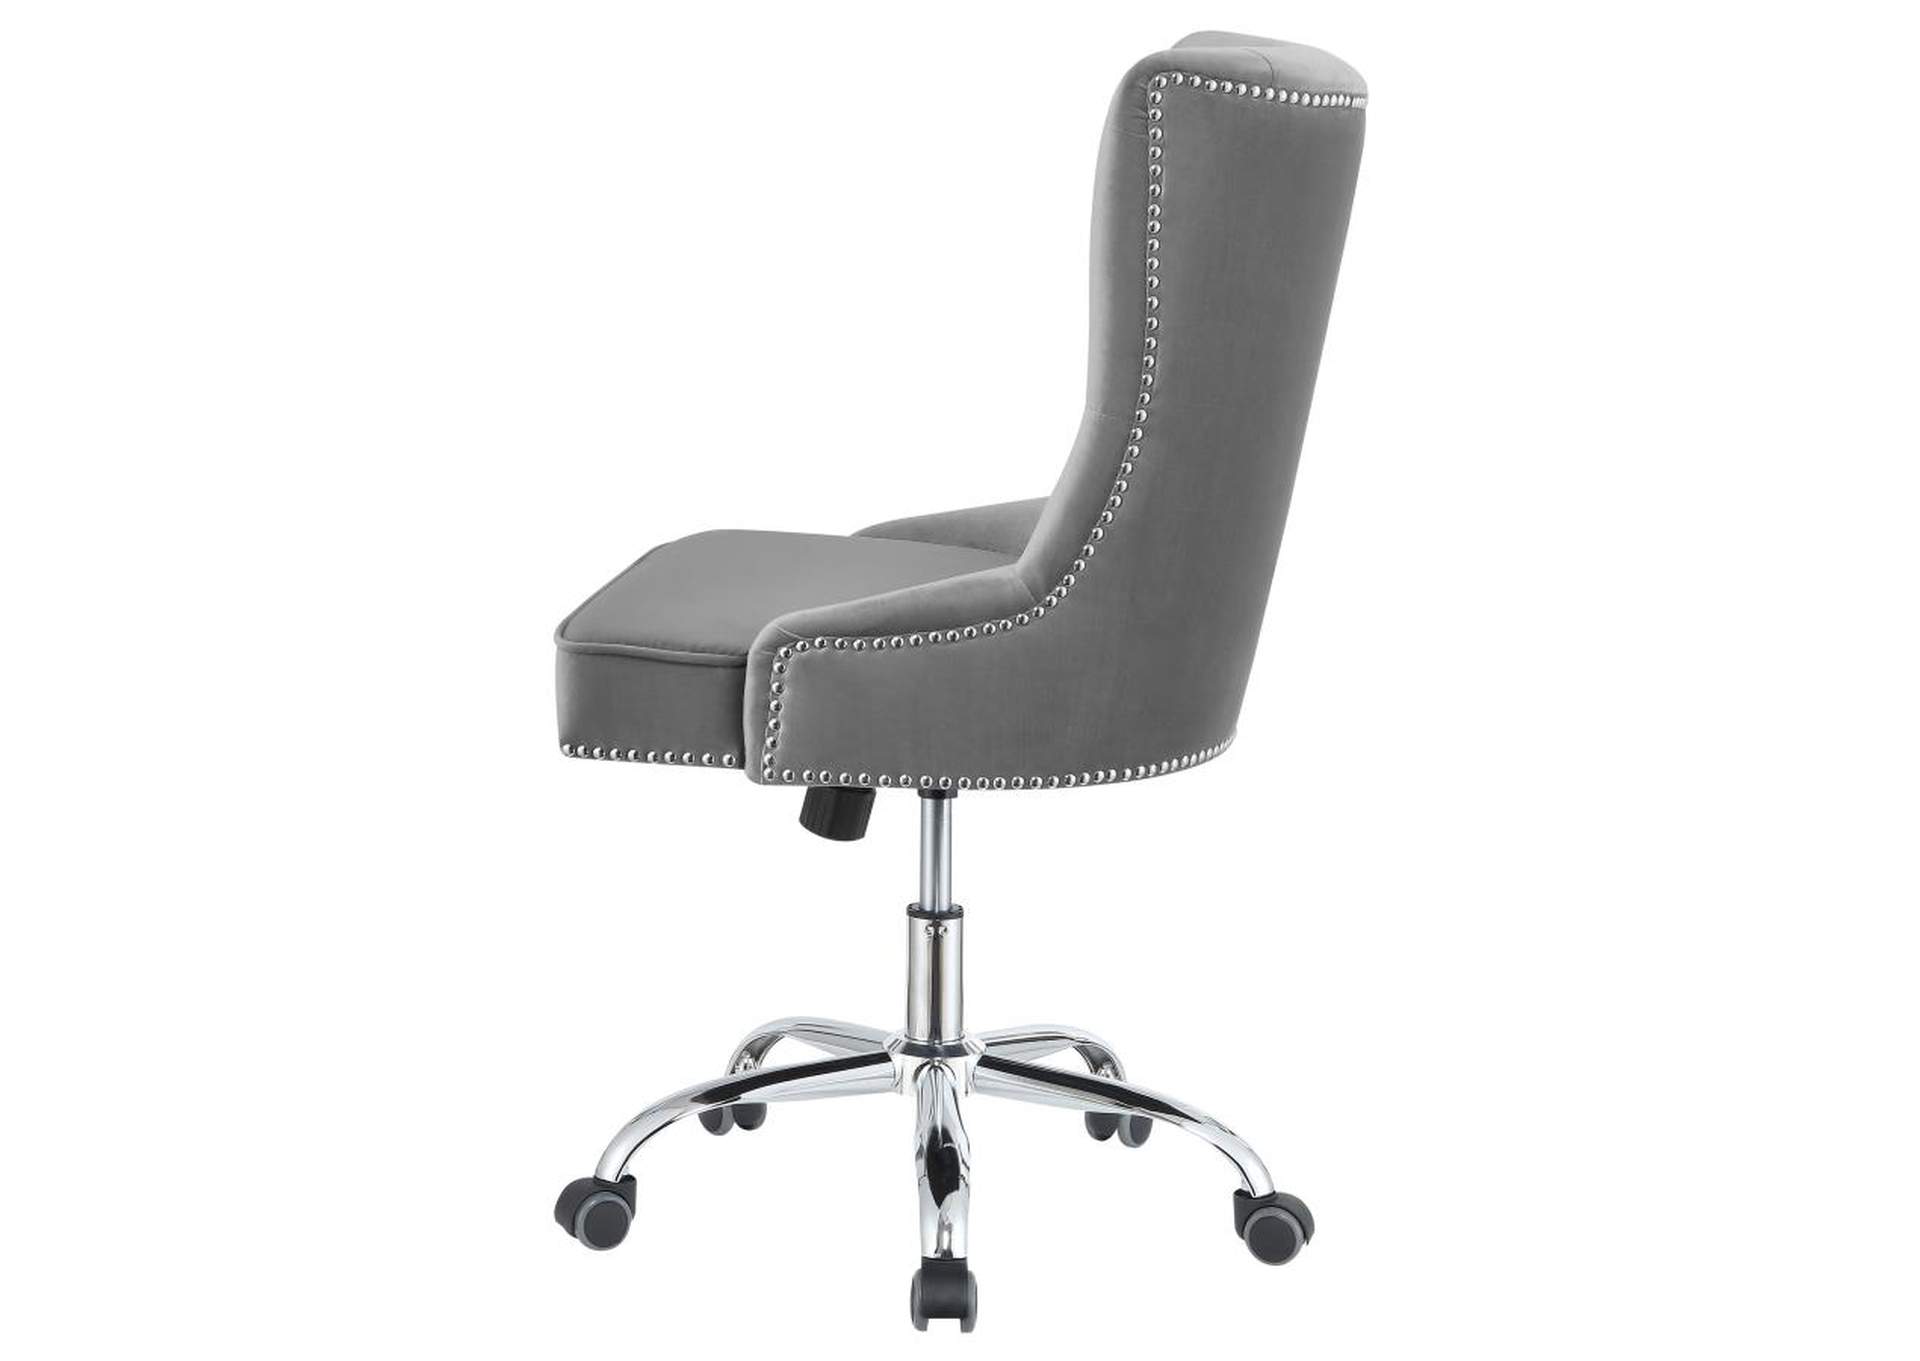 Tufted Back Office Chair Grey and Chrome,Coaster Furniture